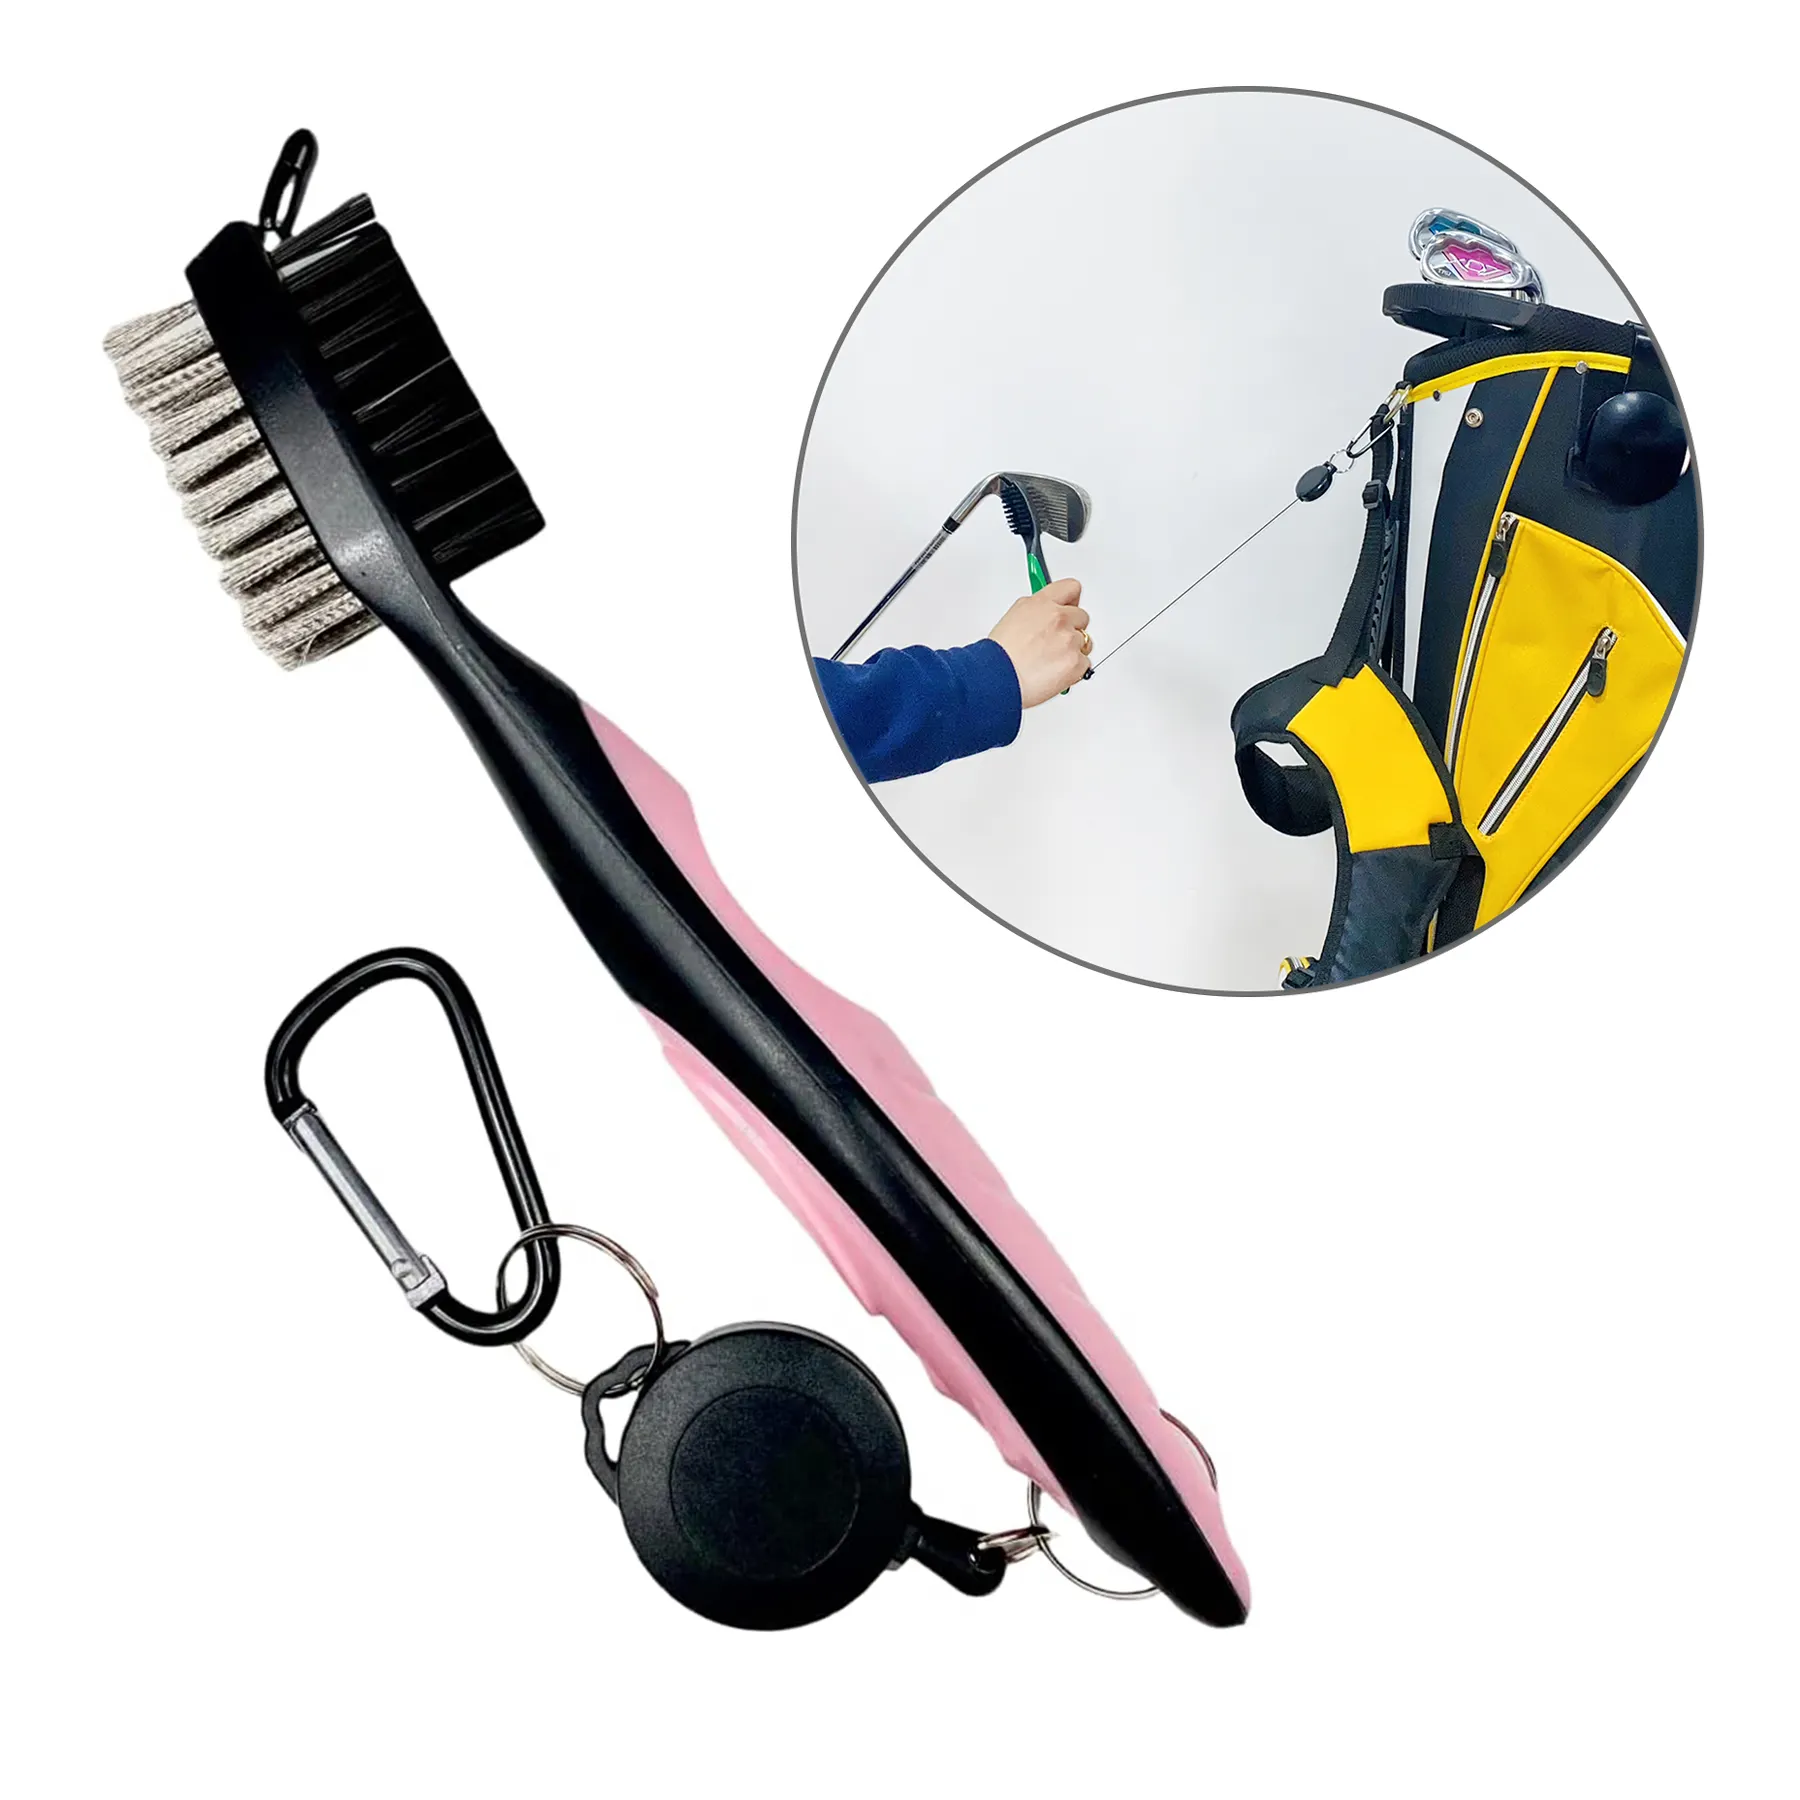 Lightweight golf club groove cleaning brush golf cleaner with 2 Ft retractable zip-line aluminum carabiner